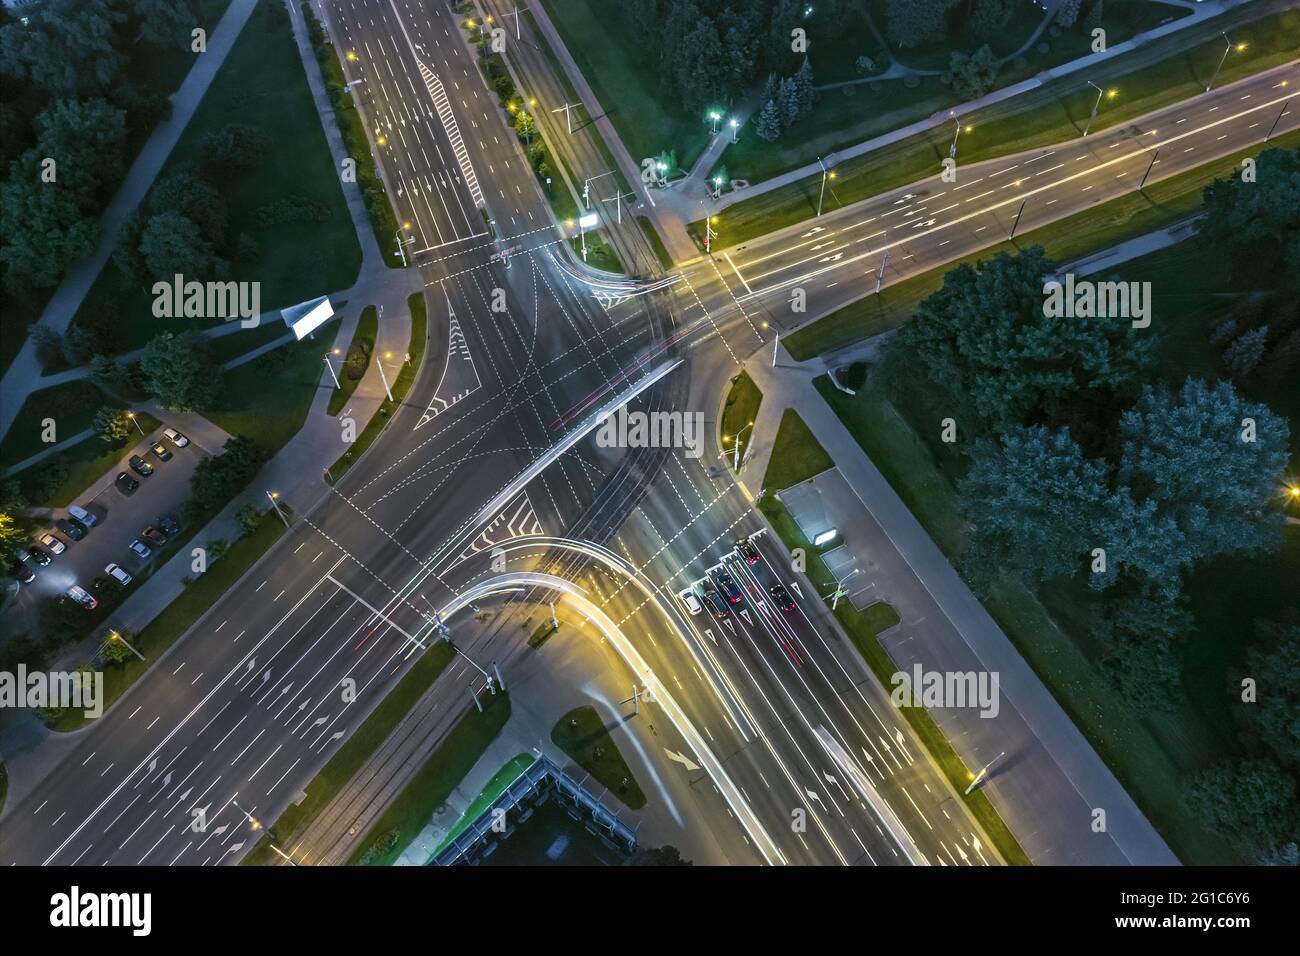 night city traffic. aerial top view of road intersection at downtown of Minsk, Belarus. Stock Photo